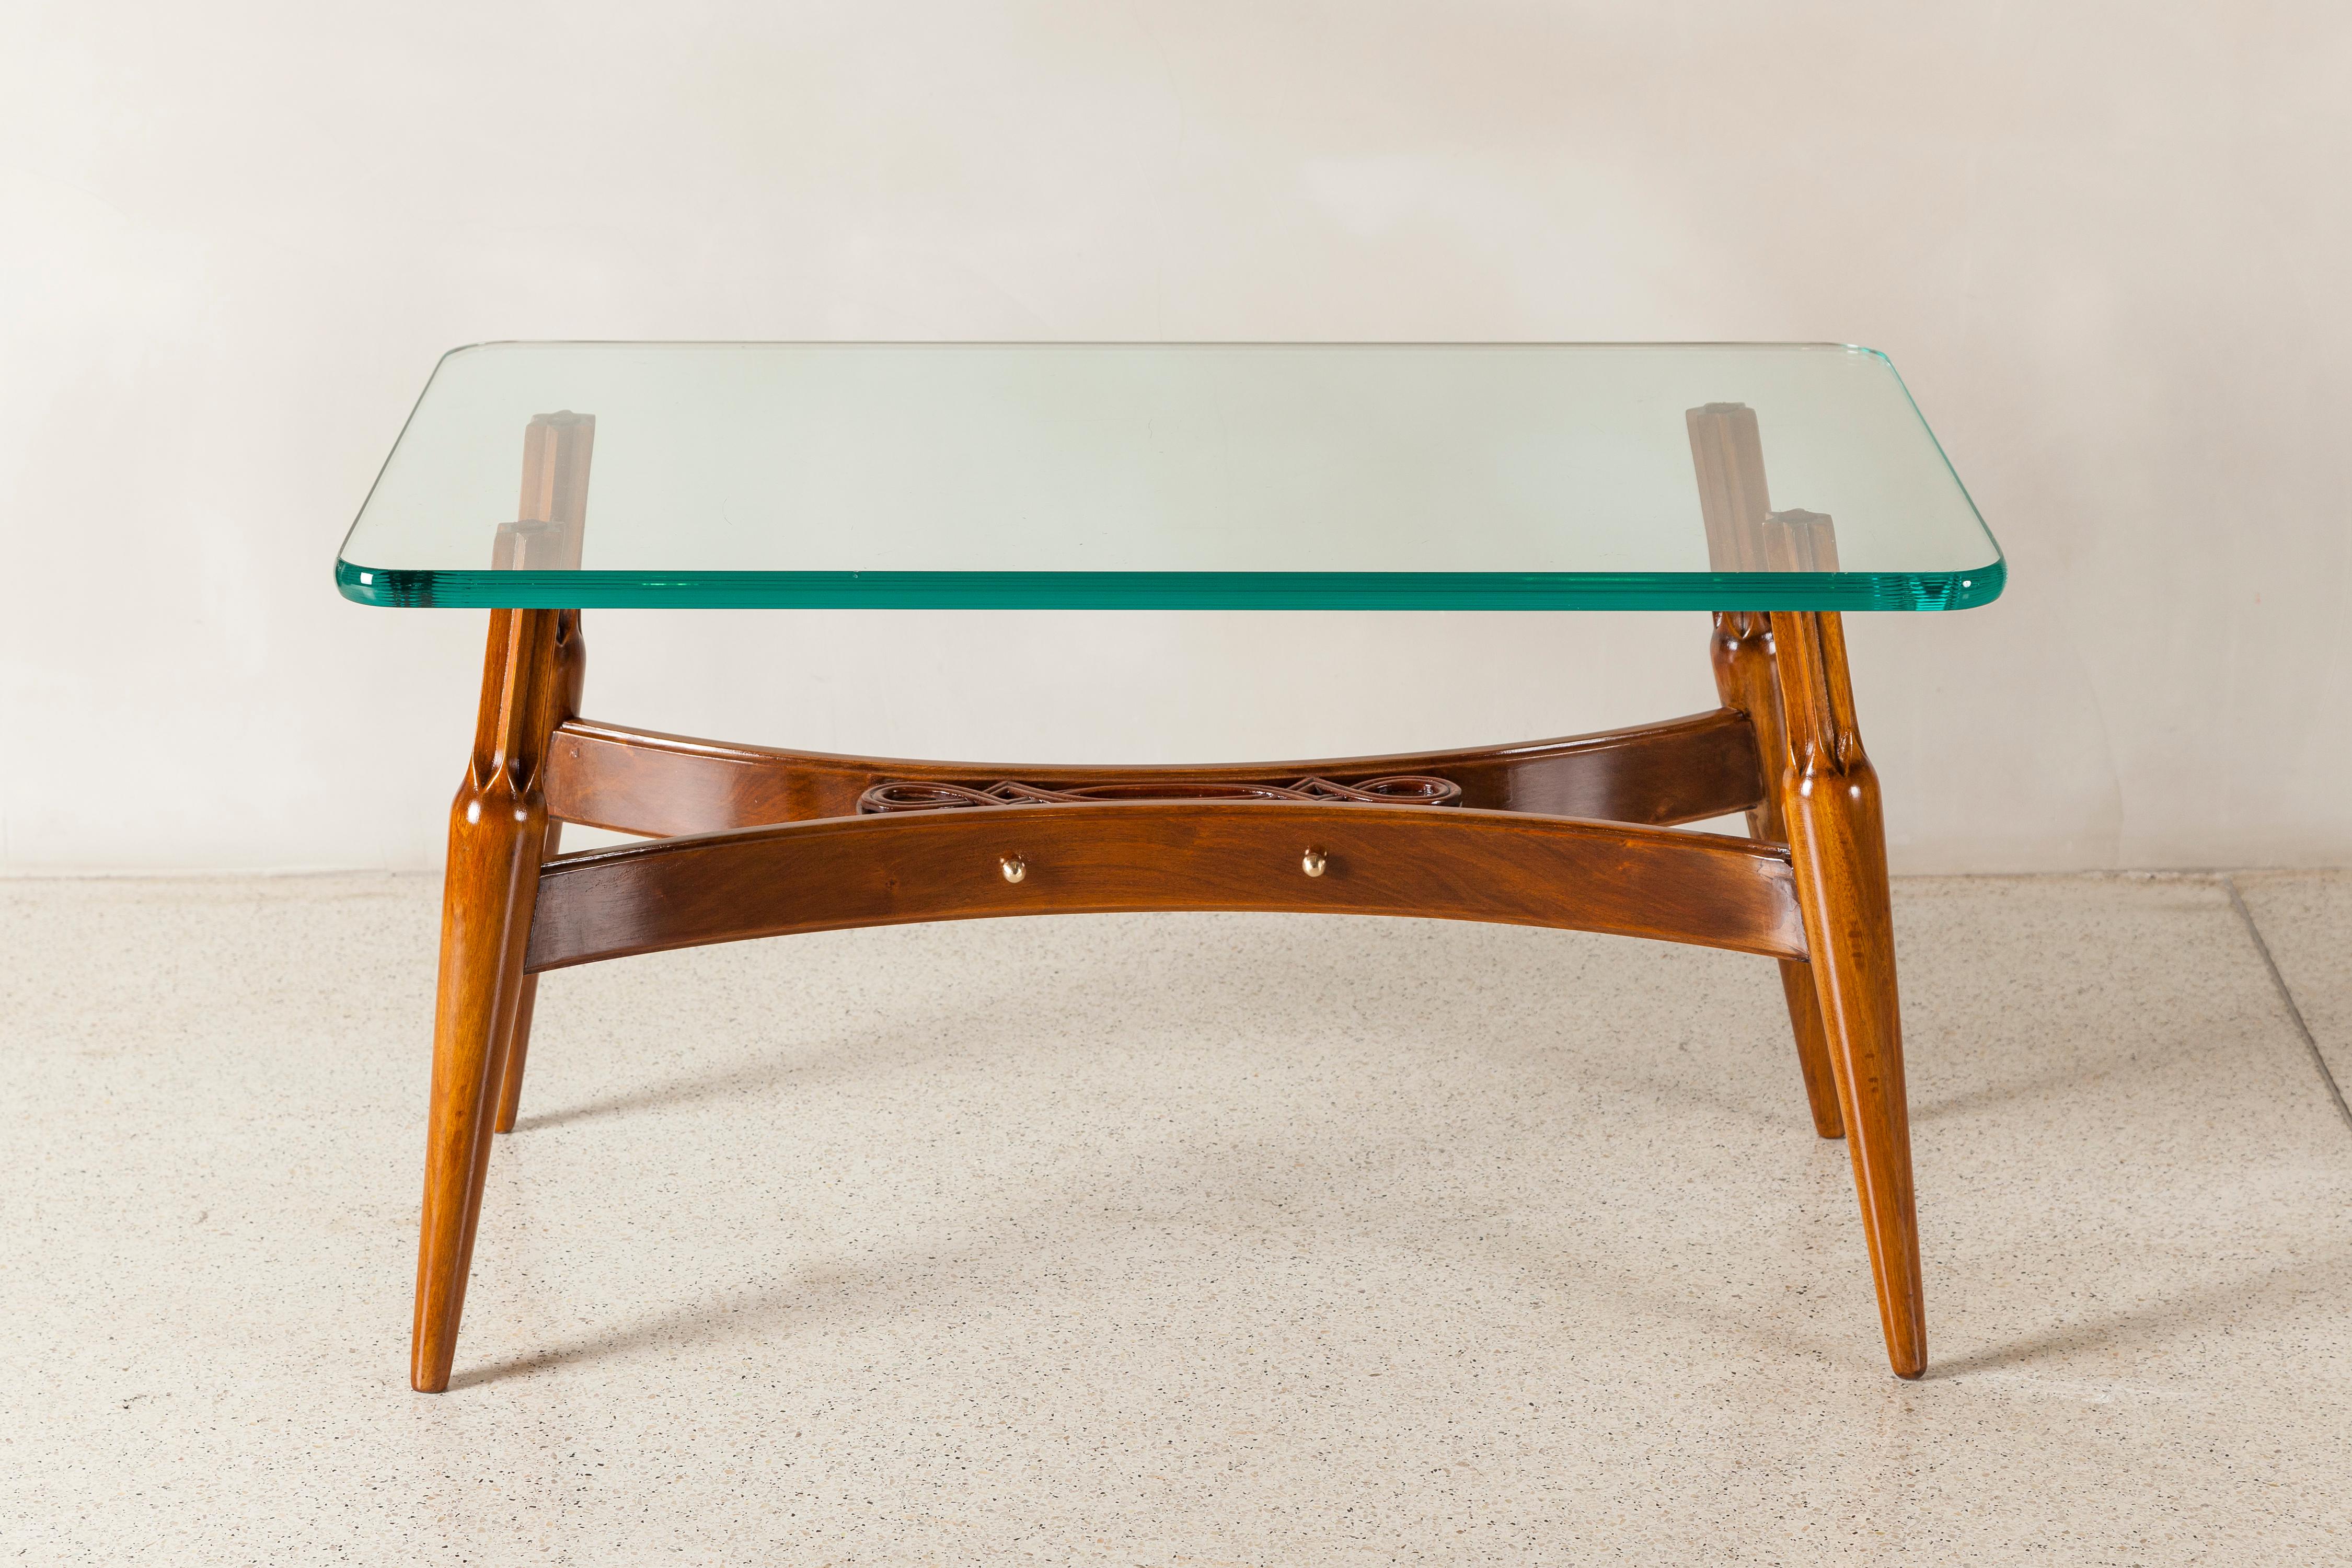 Wood and glass low table by Englander & Bonta, Argentina, circa 1950. 
Glass dimensions: 2 cm height, 80 cm width, 50 cm depth.
Dimensions of the wood base: 42 cm height, 77 cm width, 38 cm depth.